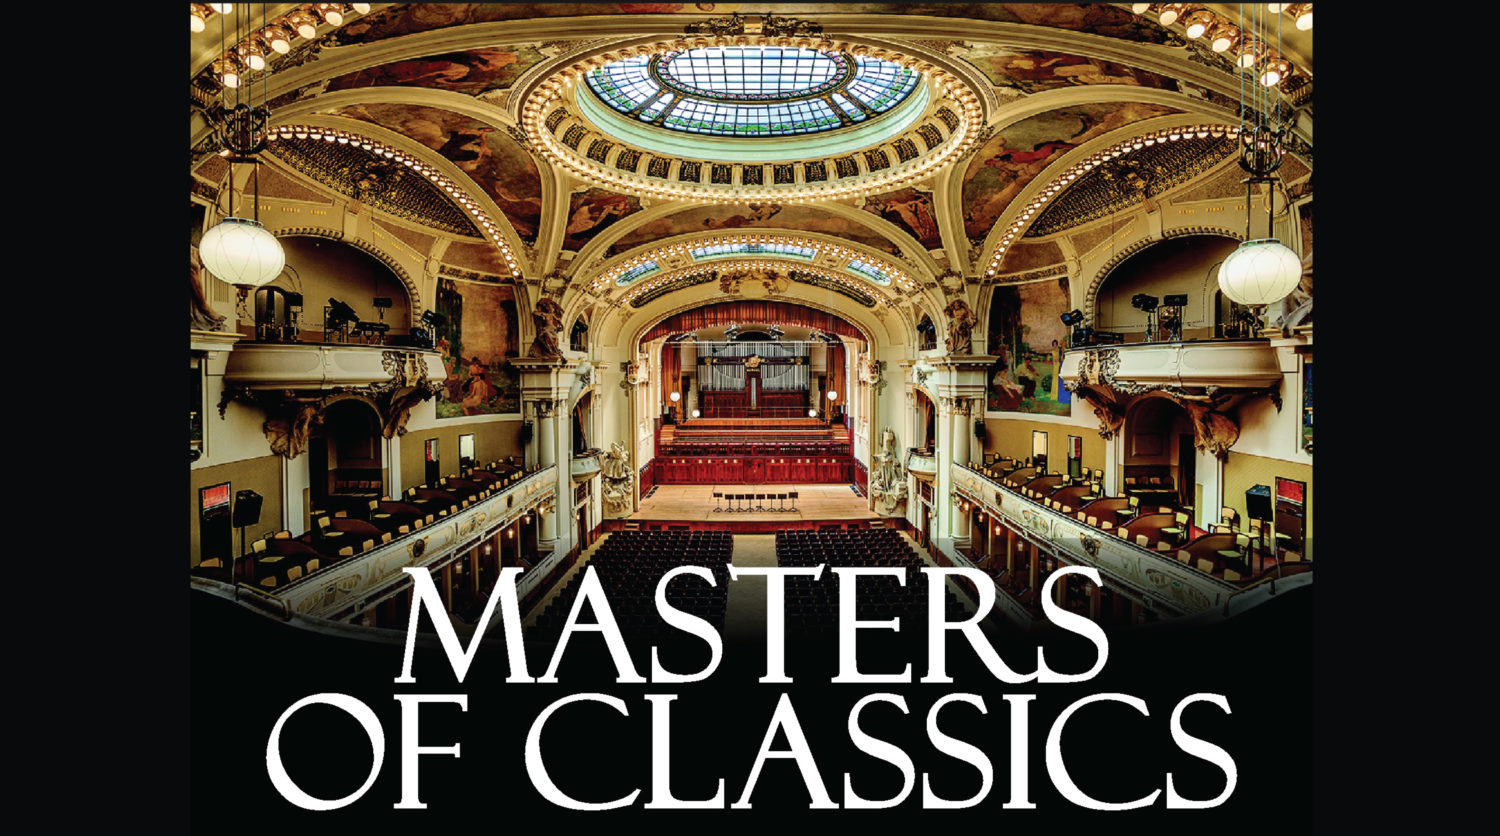 MASTERS OF CLASSICS IN THE MUNICIPAL HOUSE 17.01.2019